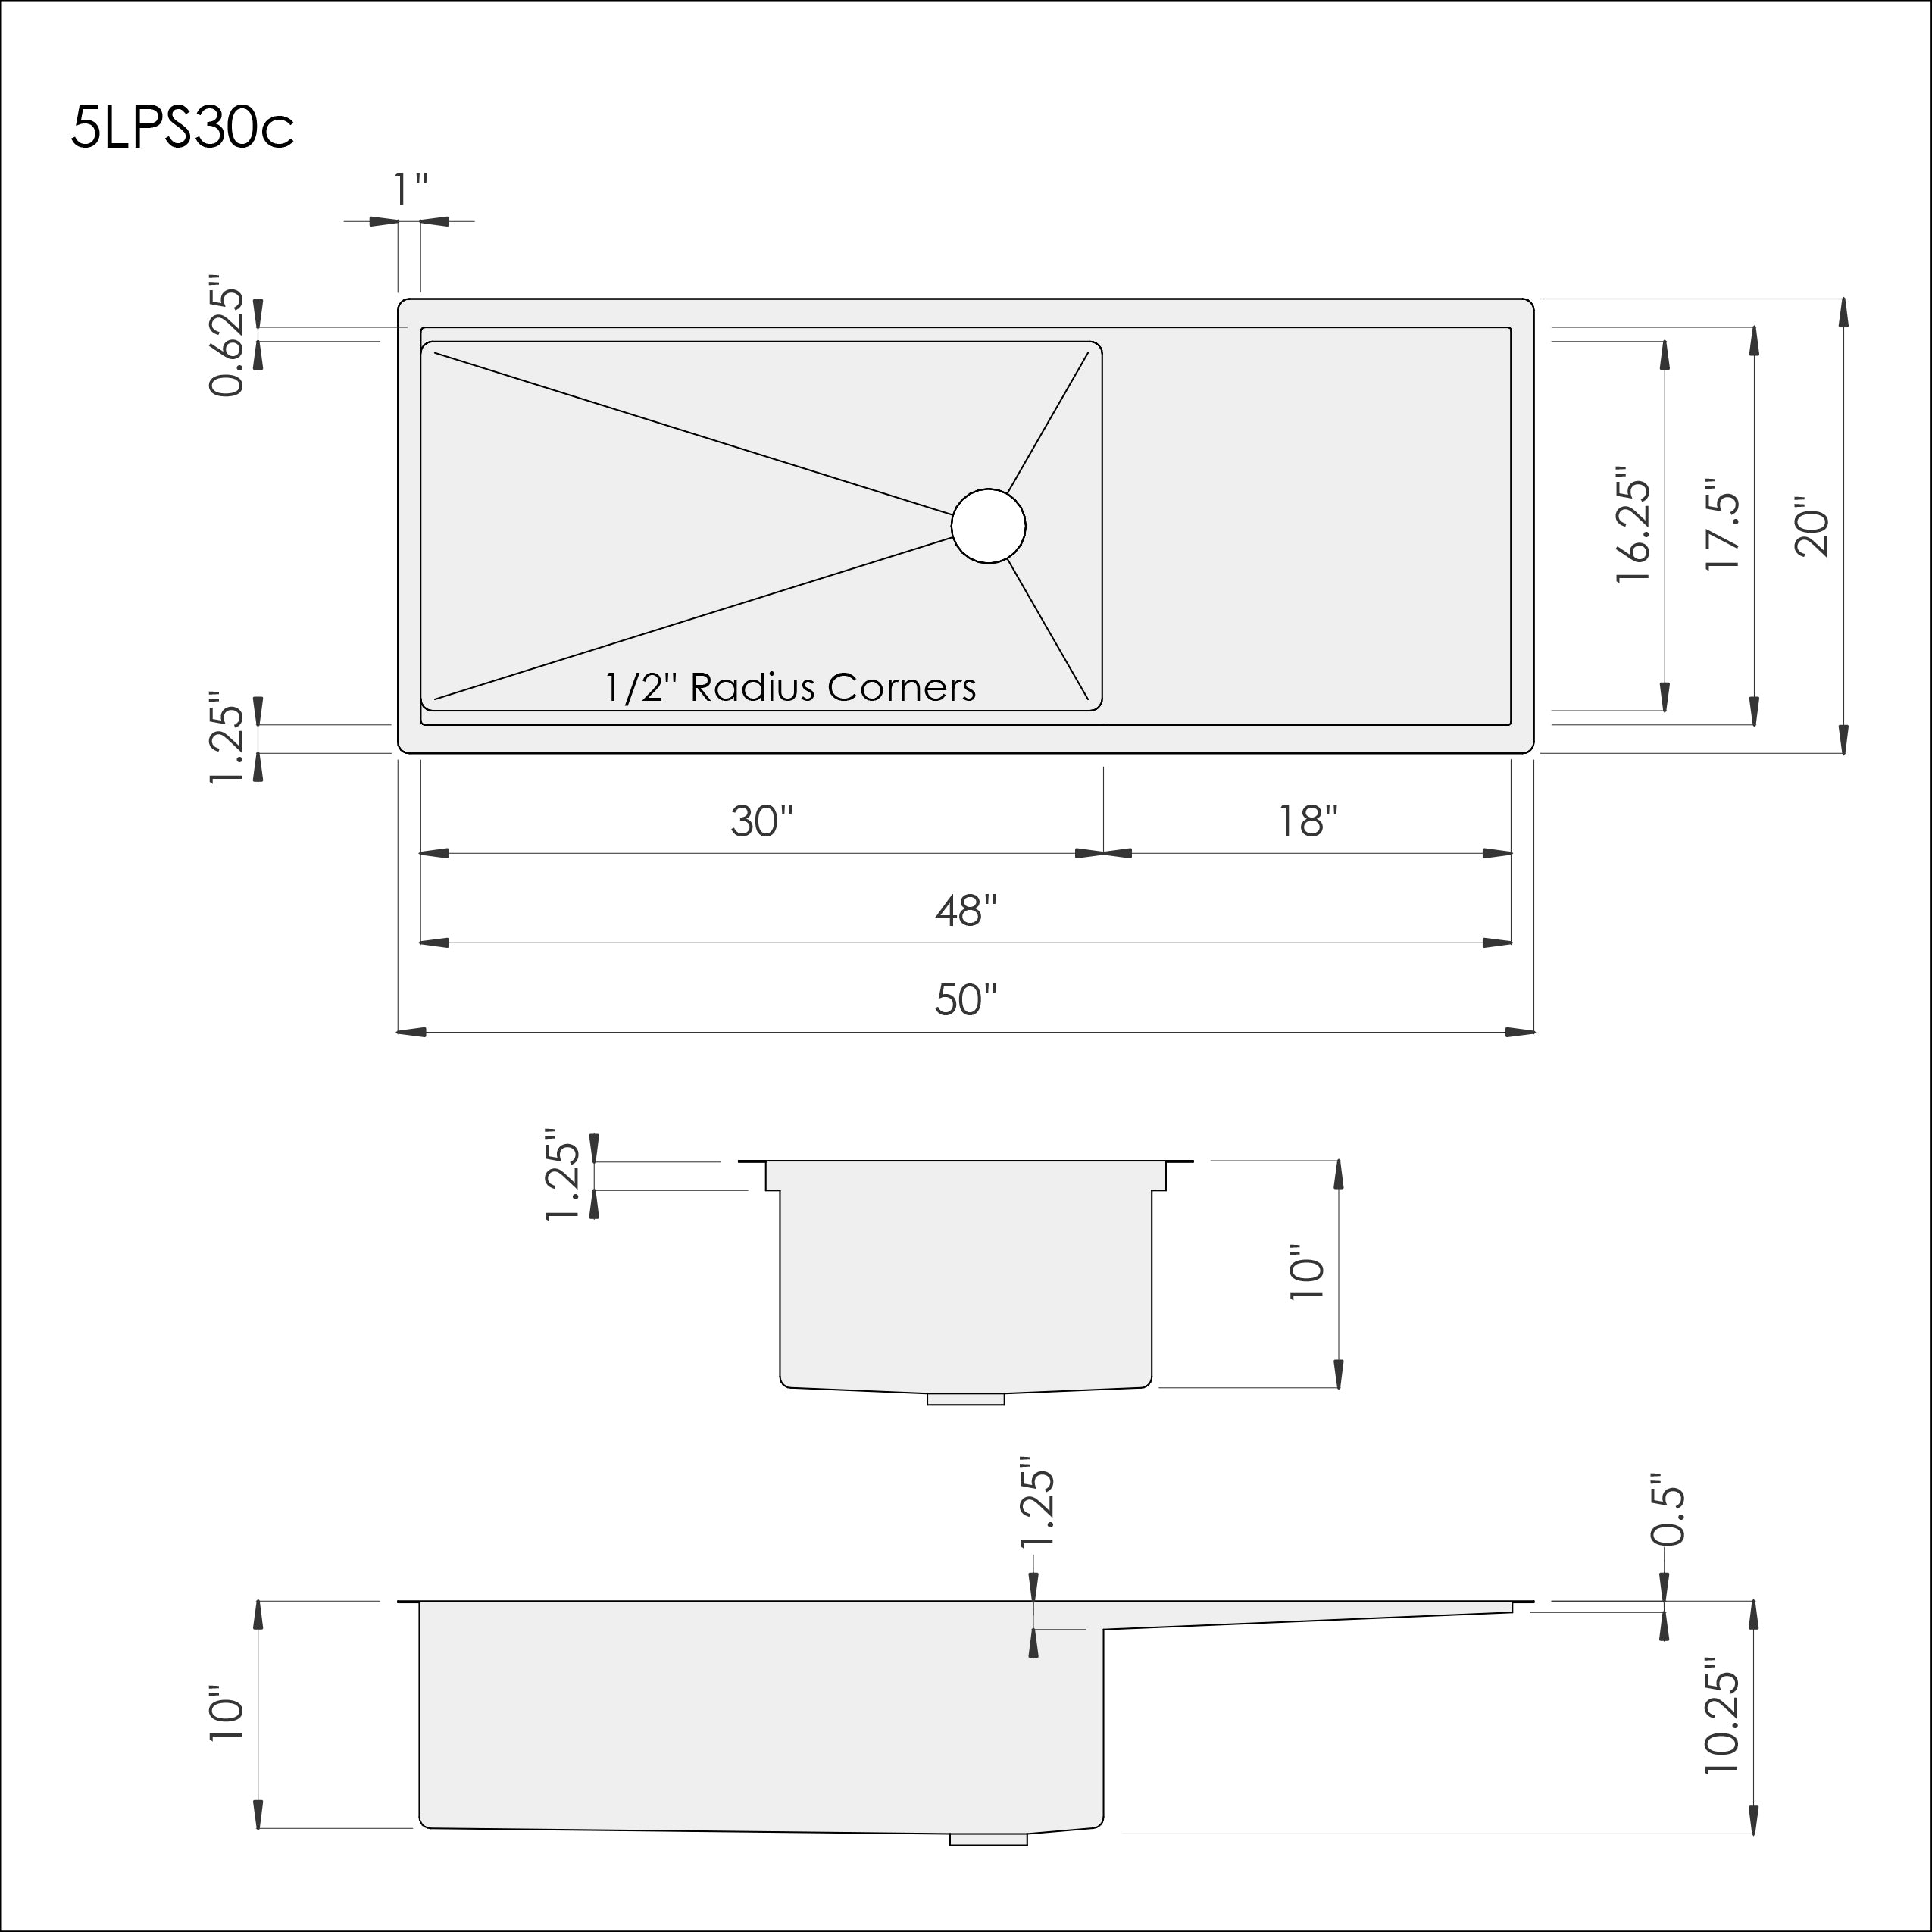 Dimensions for Create Good Sinks 50 inch stainless steel undermount workstation drainboard sink. Reversible design, 30 inch bowl, single bowl, 10 inch depth. 5LPS30c